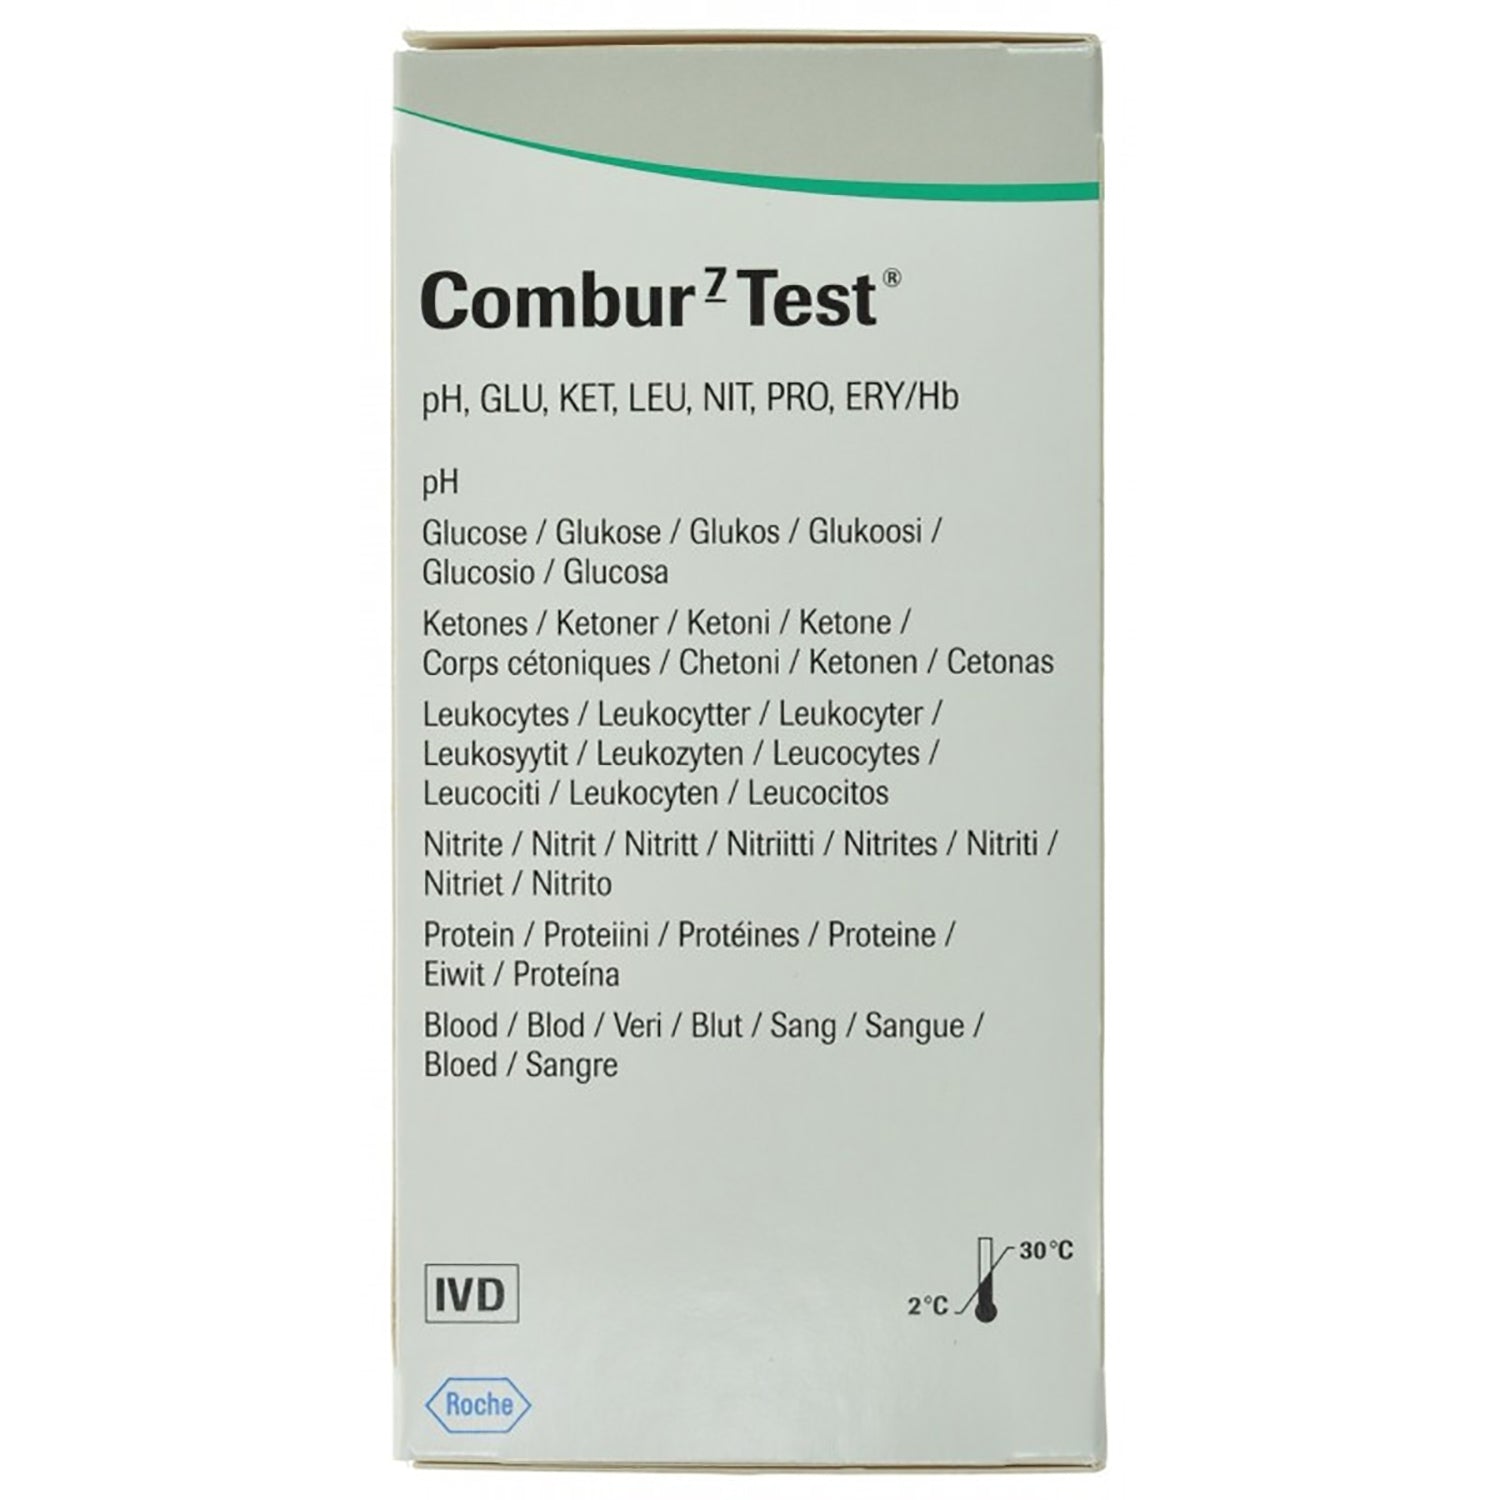 Roche Urinalysis Reagent Strips Combur7 Test | Pack of 100 (1)